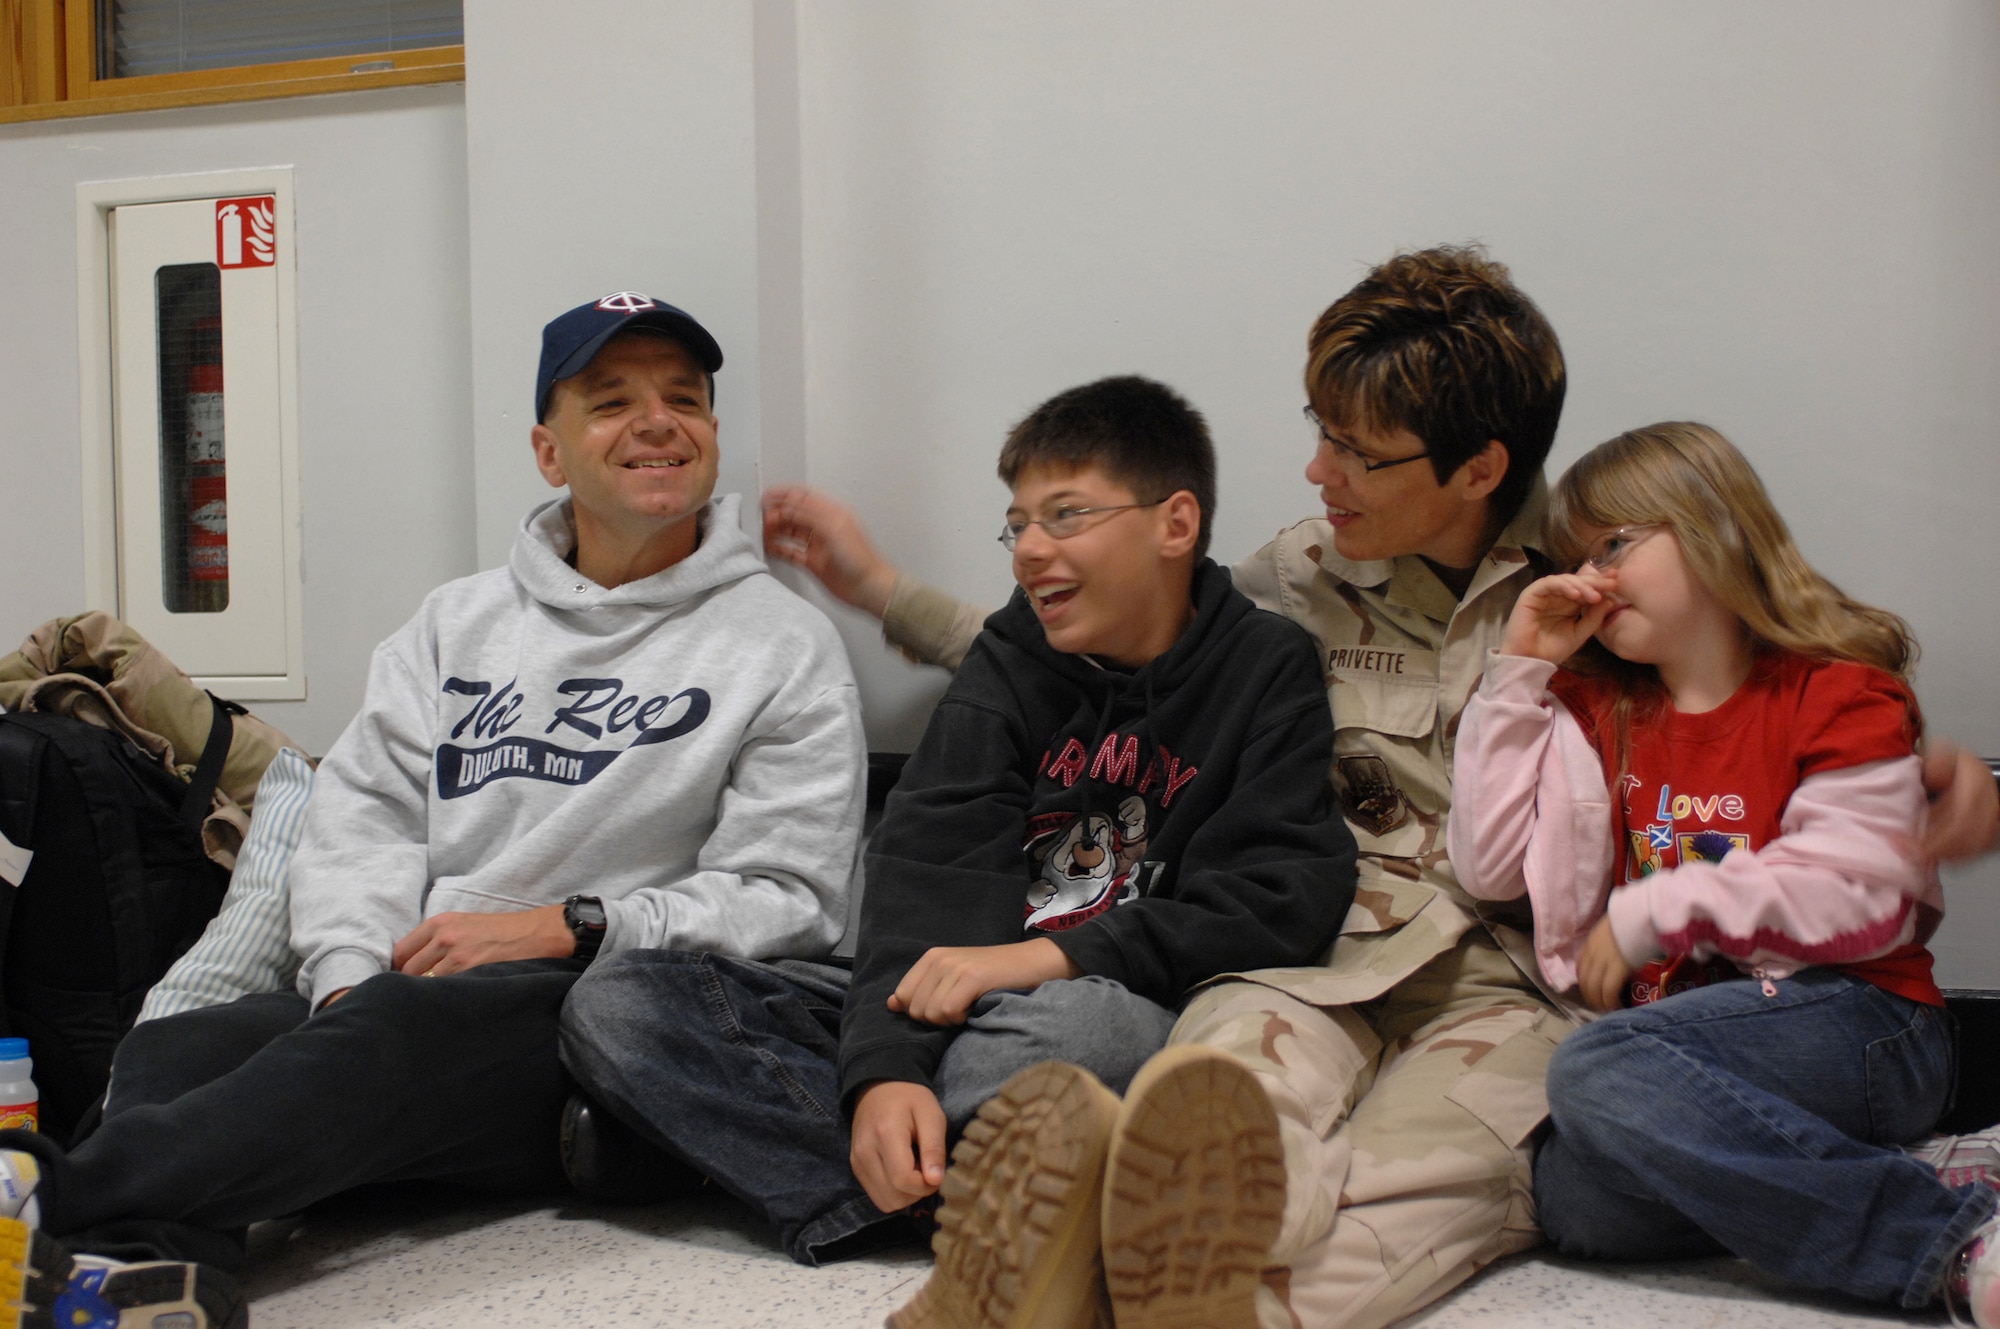 Master Sgt. Julie Privette, from the 100th Services Squadron, jokes with her husband, Master Sgt. Derek Privette, 352nd Operations Support Squadron Security Forces, son Matthew, 12, and daughter Rachel, 8, prior to her deployment from RAF Mildenhall, Sept. 14, 2007. (U.S. Air Force photo by Tech. Sgt. Tracy L. DeMarco)
